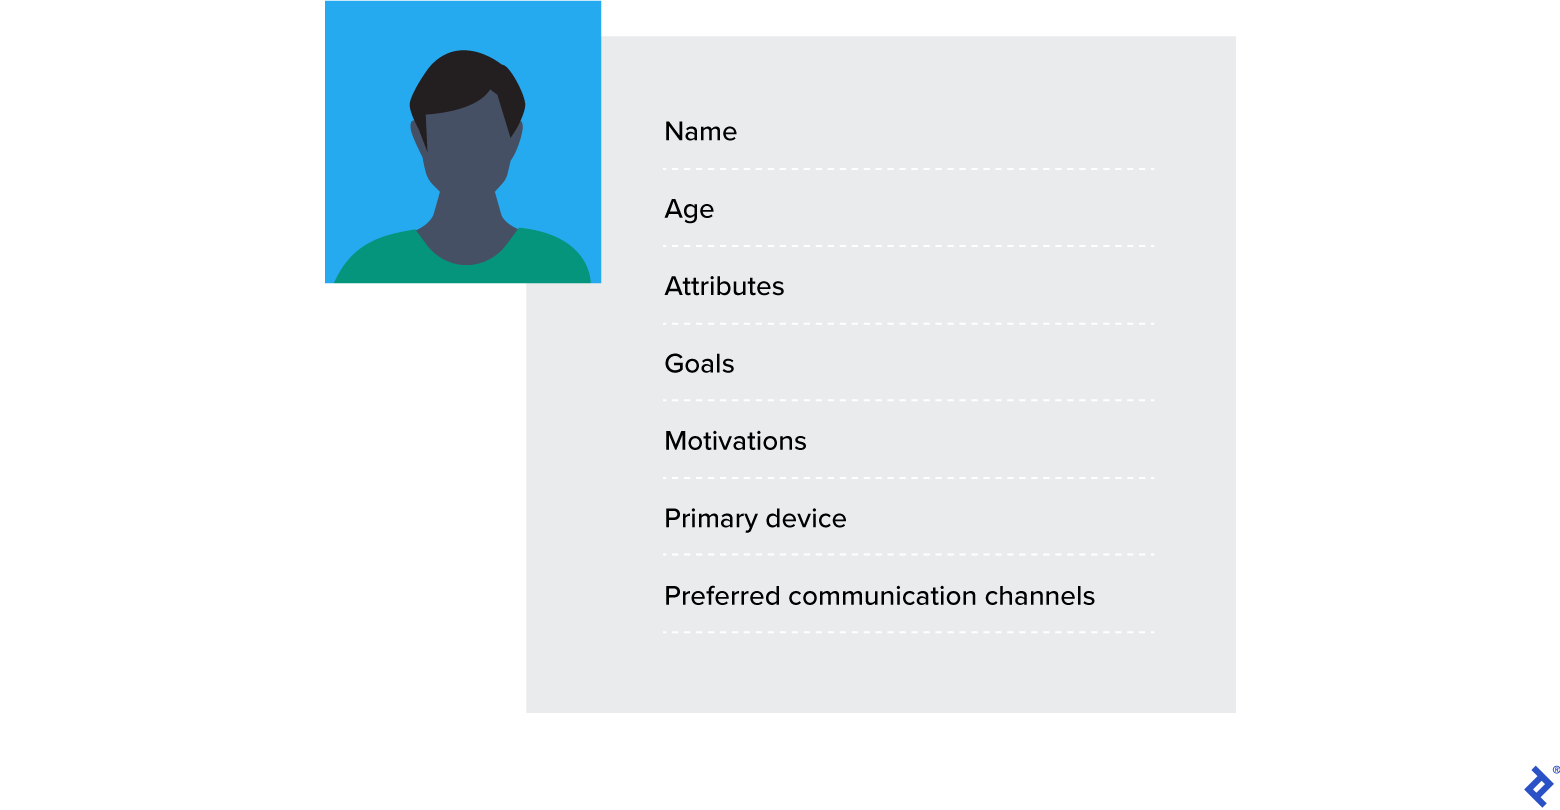 User personas include the target userâs traits, such as attributes, goals, and preferred communication channels.